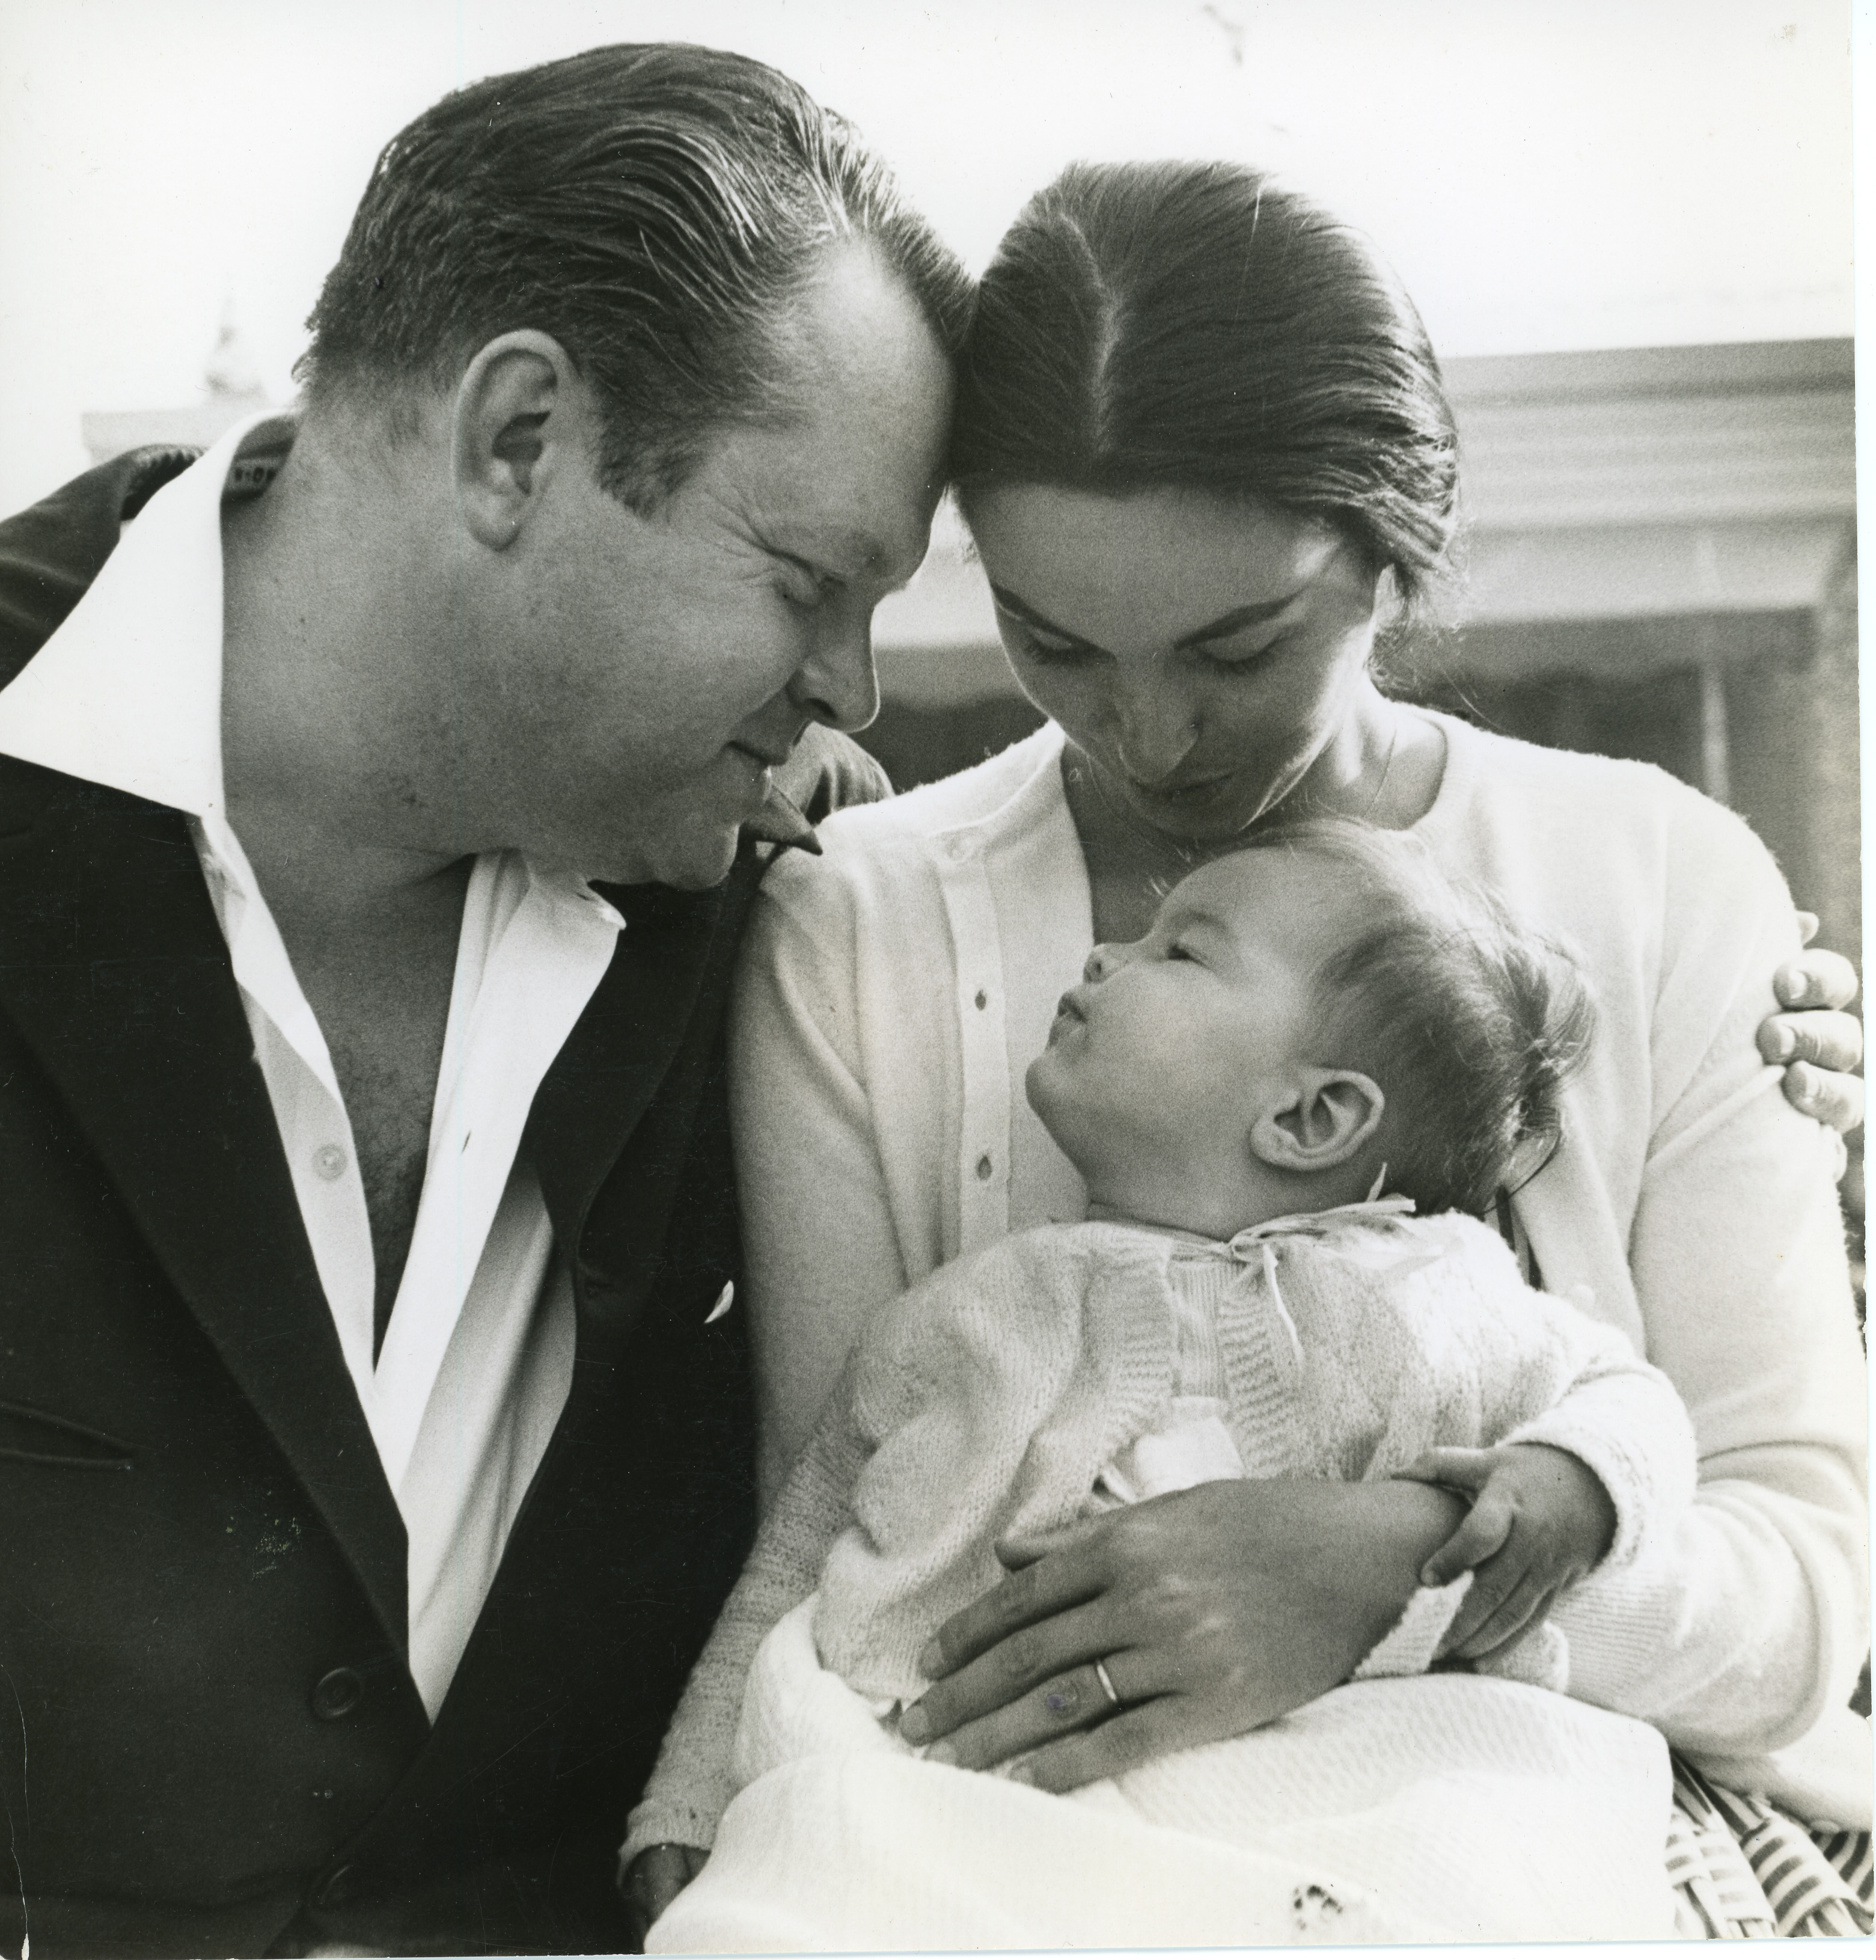 Orson Welles and Paola Mori look adoringly at their infant daughter, Beatrice (c. 1955).